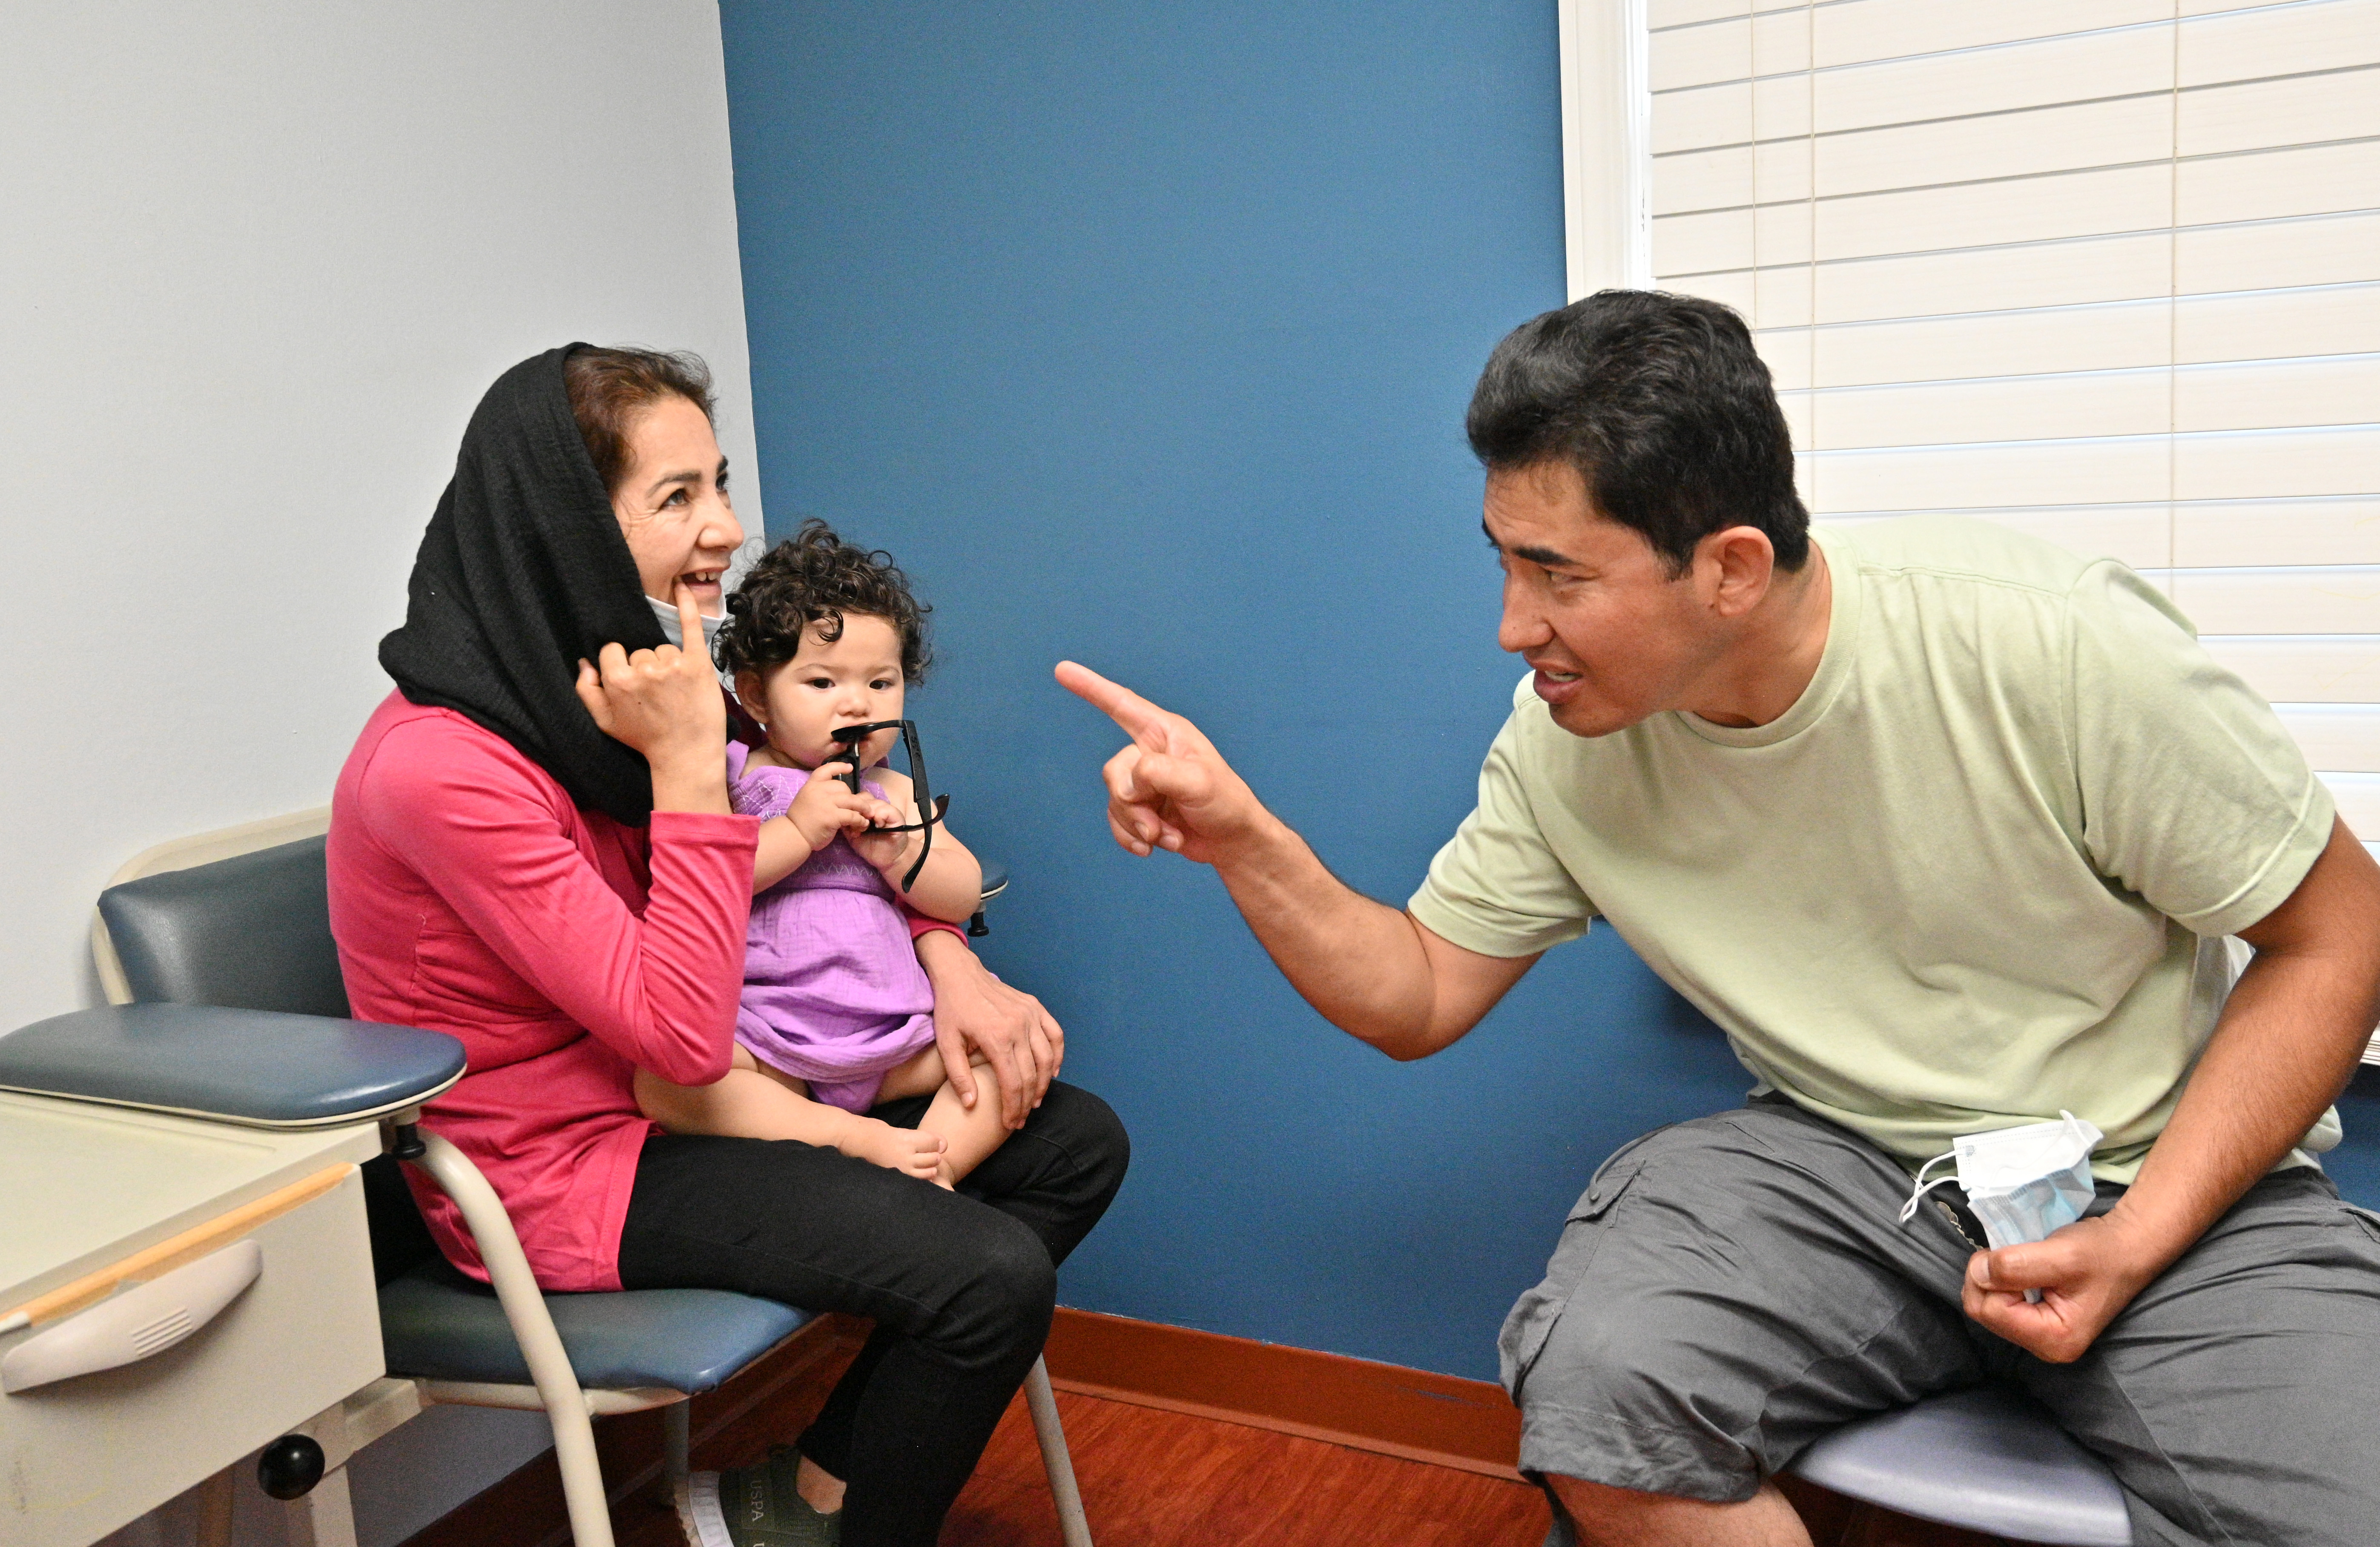 June 24, 2022 Clarkston - Ahmad Farid Frotan (right) explains the need of dental care for him and his wife Rahima Rahimi as she holds their 1-year-old daughter Sosan at Ethne Health Clinic in Clarkston on Friday, June 24, 2022. The medical practitioners at Ethne Health, a Clarkston community clinic, say many of their patients suffer from oral health problems. They hope to one day be able to expand and start operating a dental center in the community. (Hyosub Shin / Hyosub.Shin@ajc.com)